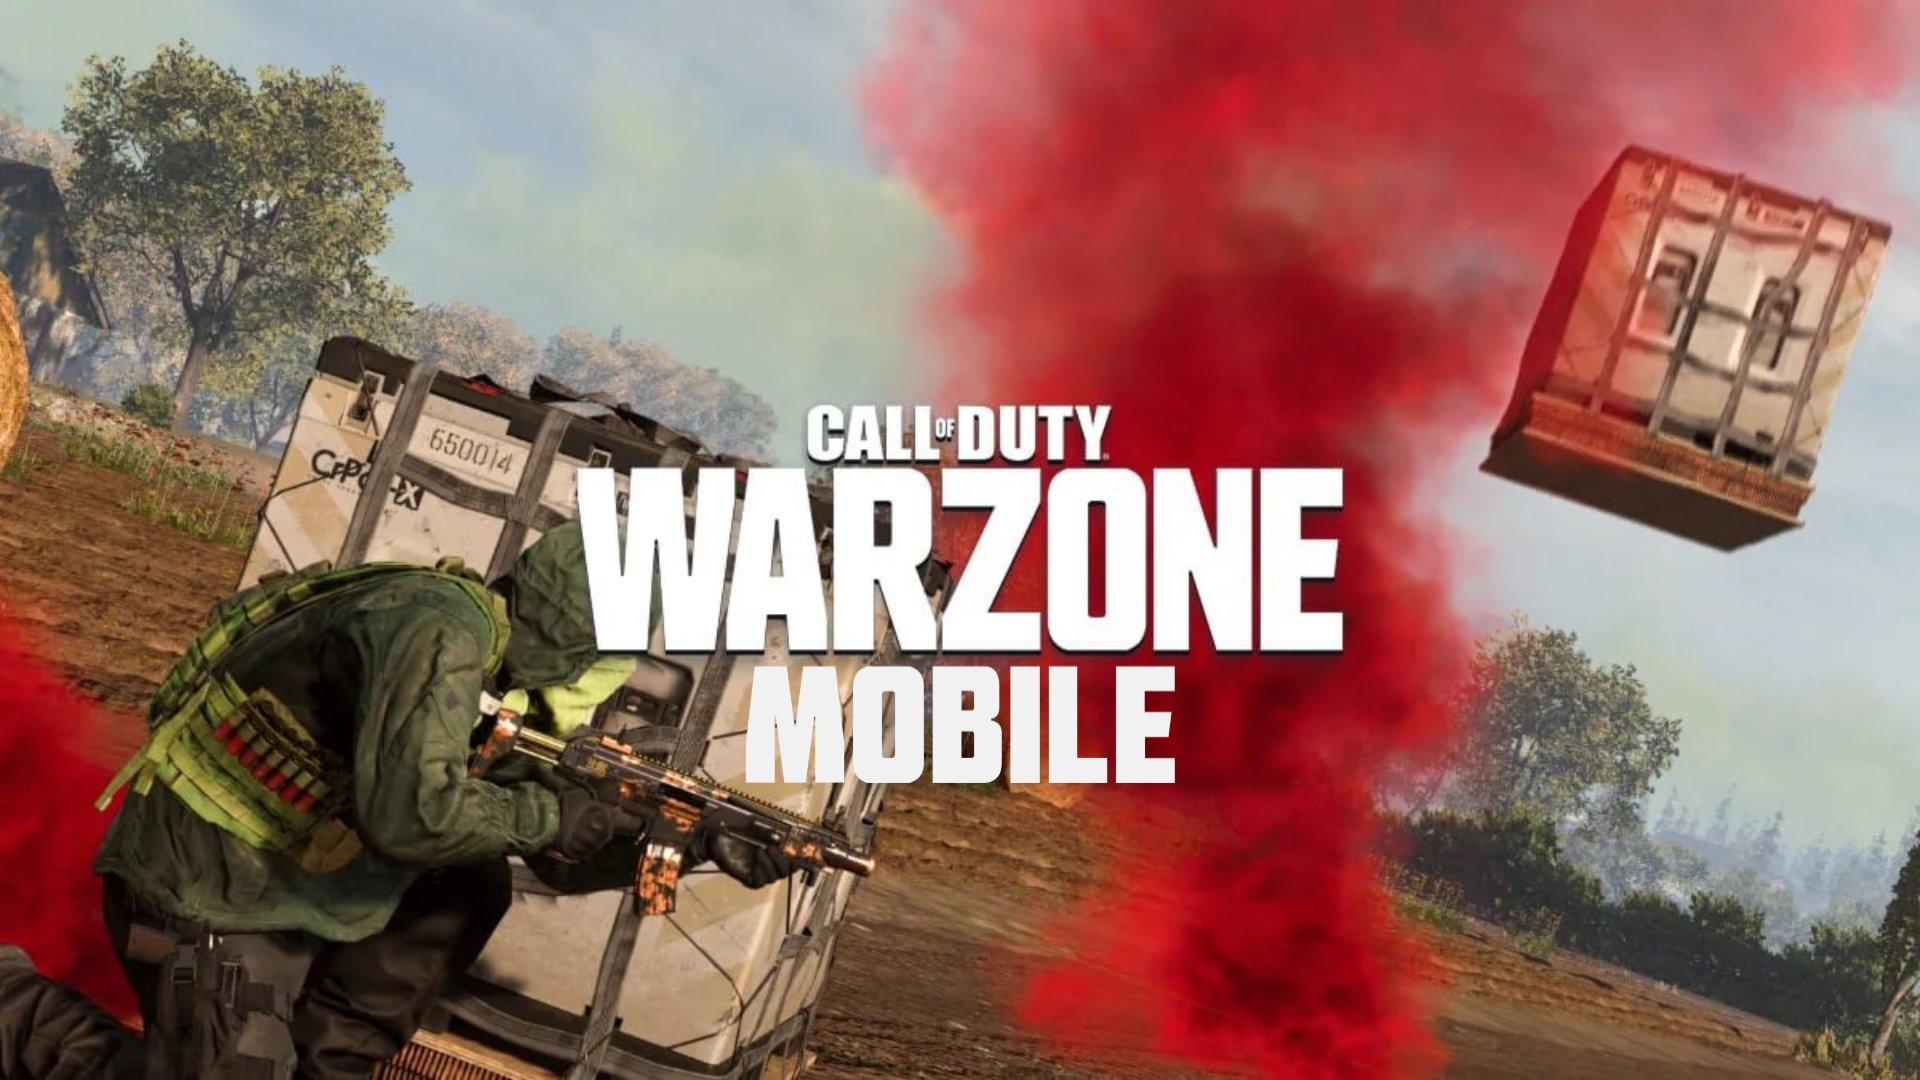 warzone mobile live tamil, Call Of Duty Warzone Mobile live